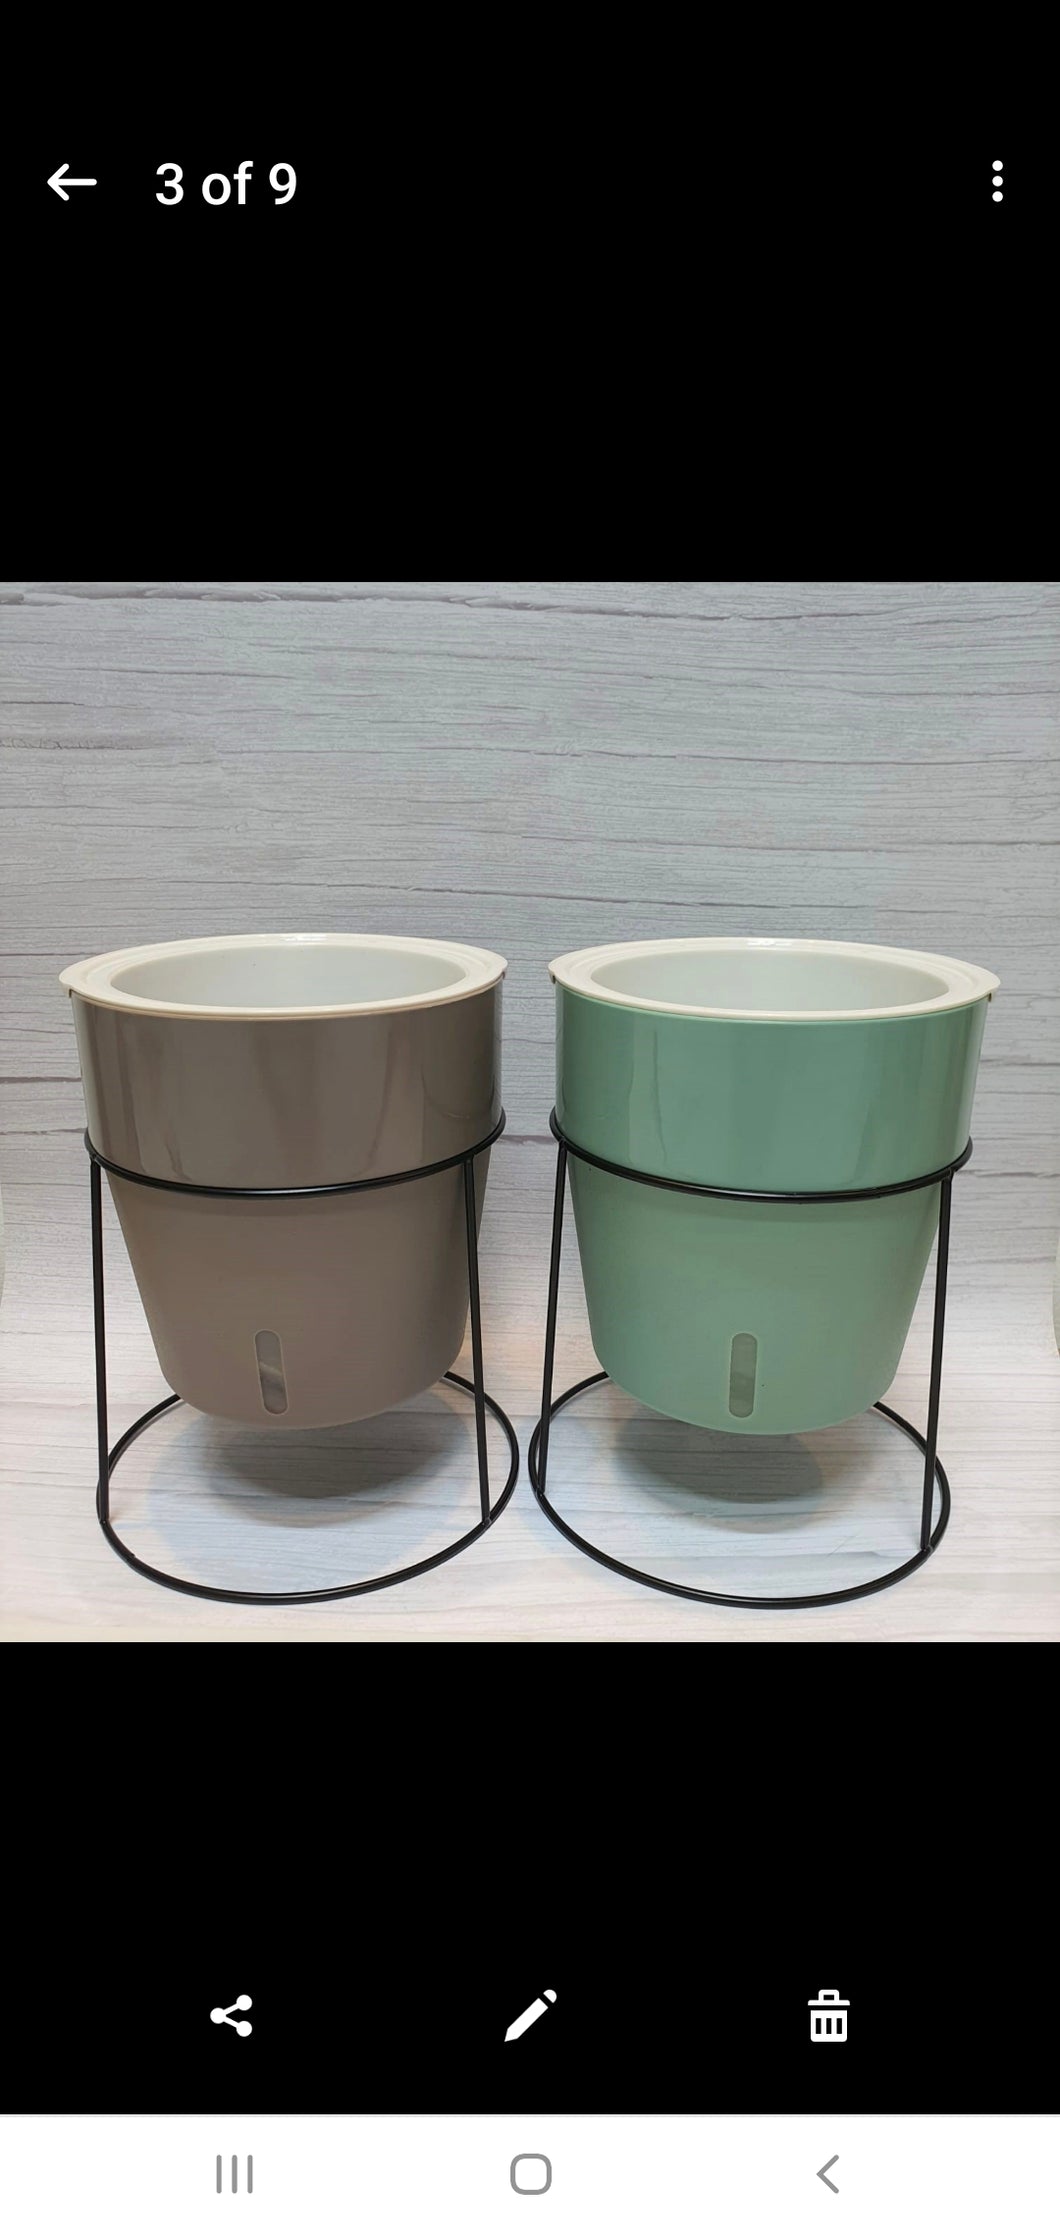 Black pot stand for colored pots